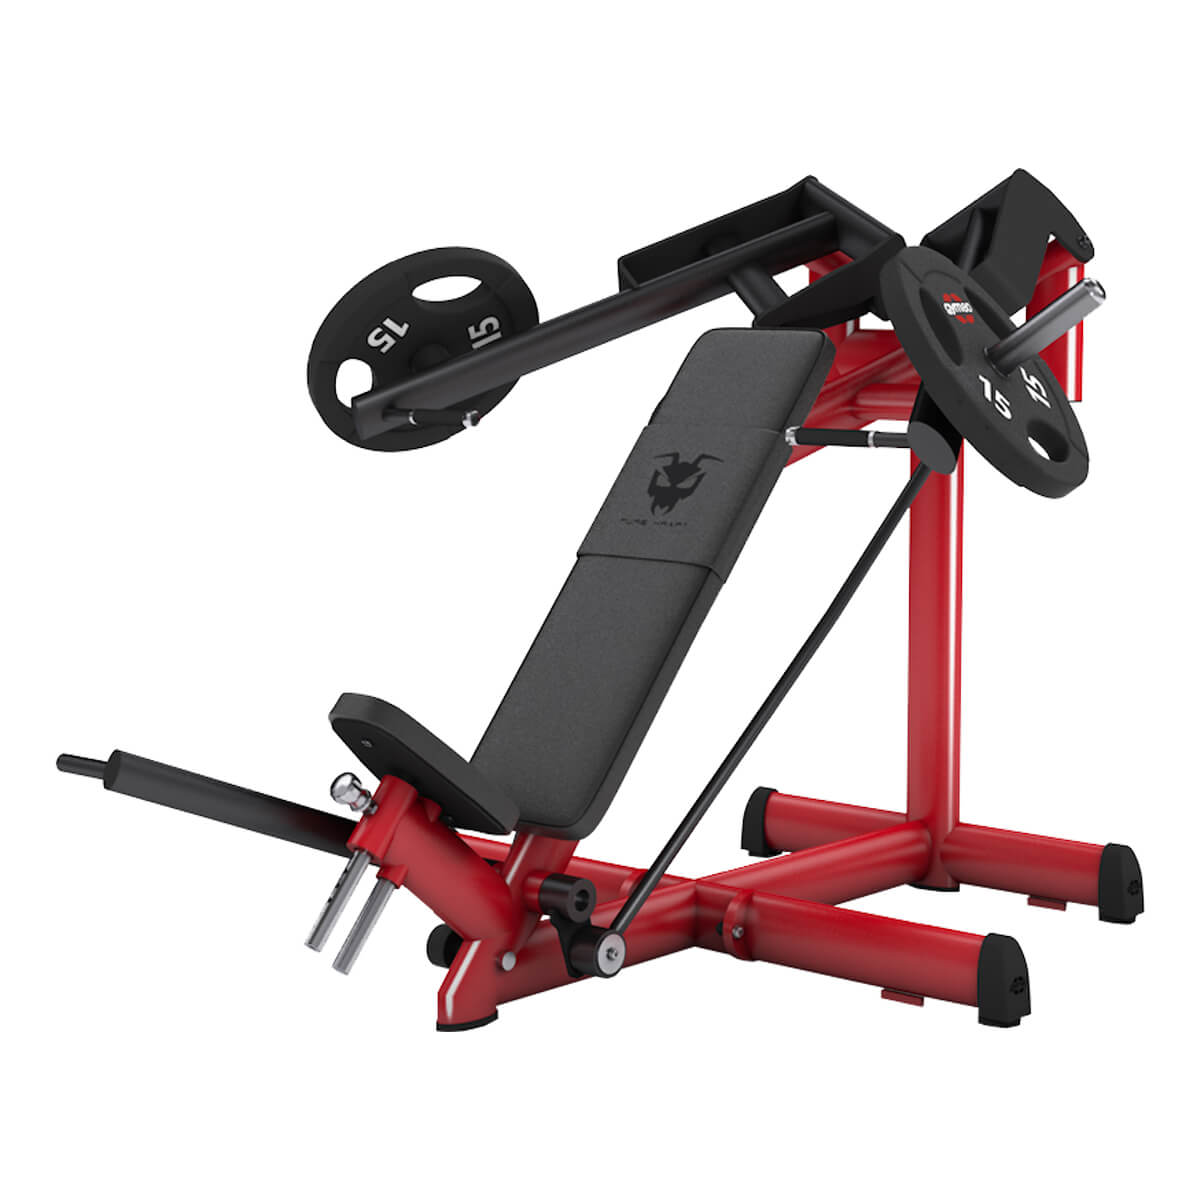 INCLINE CHEST PRESS DUAL GYM80-G4329A 寸法 : (W)1980×(D)1670×(H)1400mm
重量 : 170㎏
カラー : カスタマイズ可能